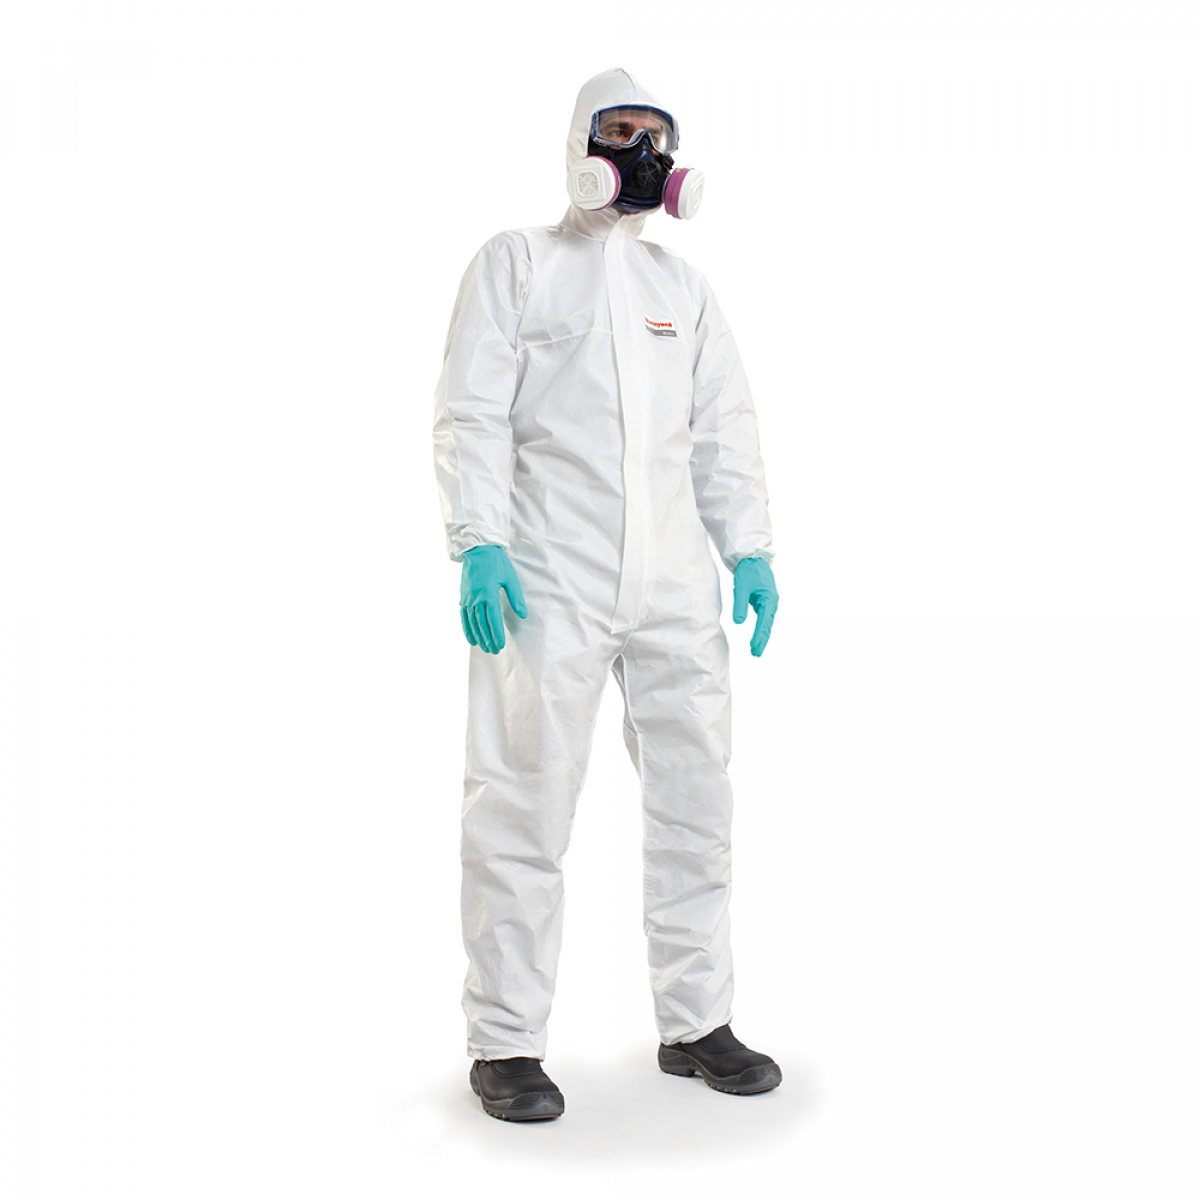 Honeywell Mutex 2 Coveralls - Resistant to tearing & liquid penetration